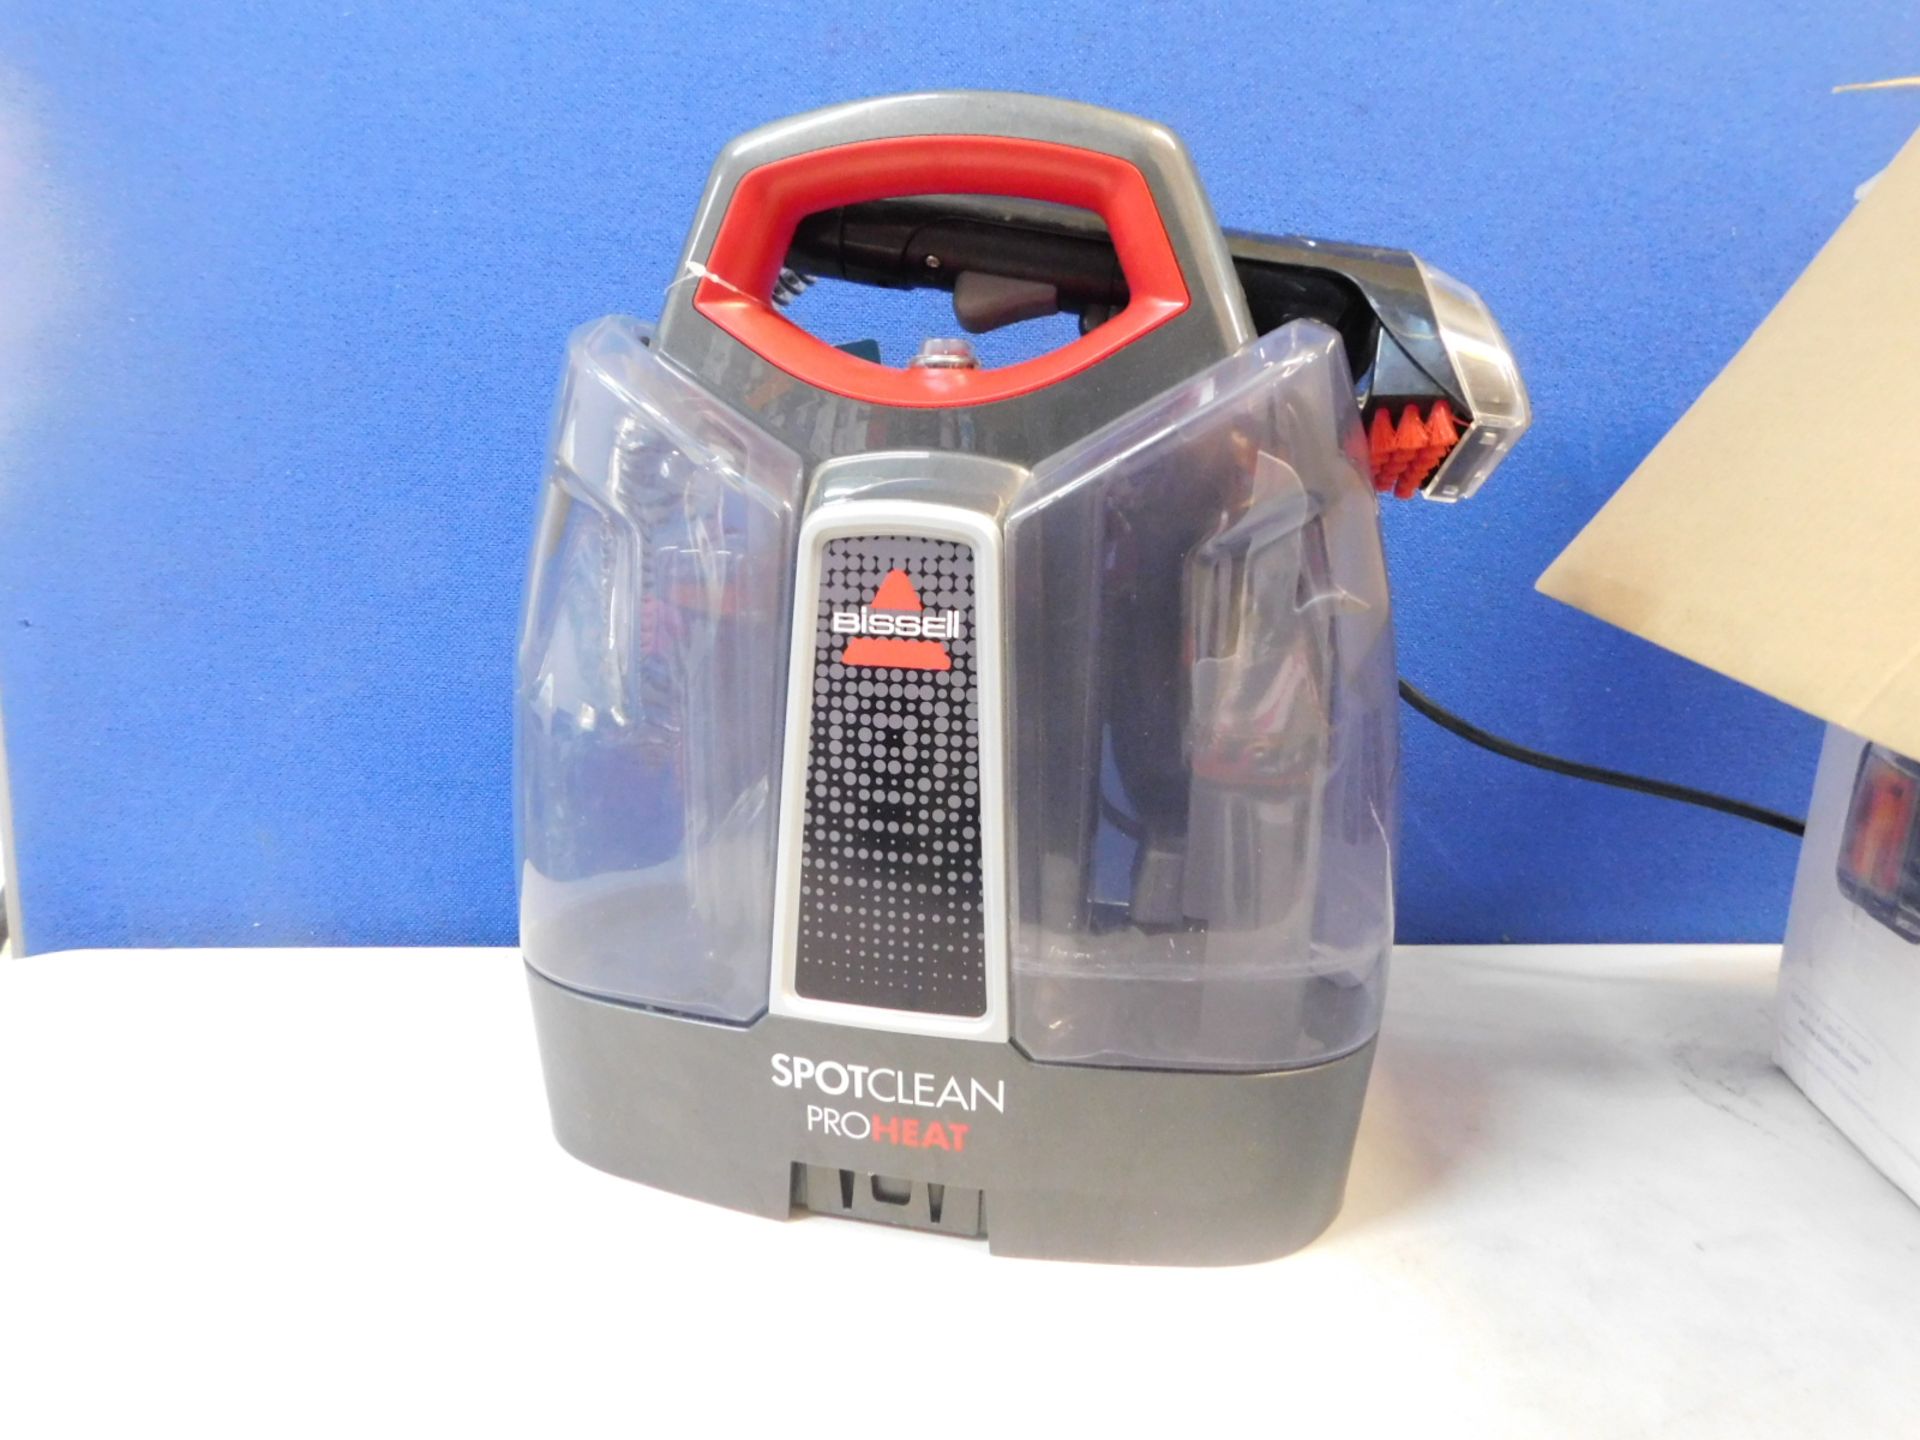 1 BOXED BISSELL SPOTCLEAN PROHEAT PORTABLE SPOT AND STAIN CARPET CLEANER RRP Â£199 (POWERS ON) - Image 4 of 4